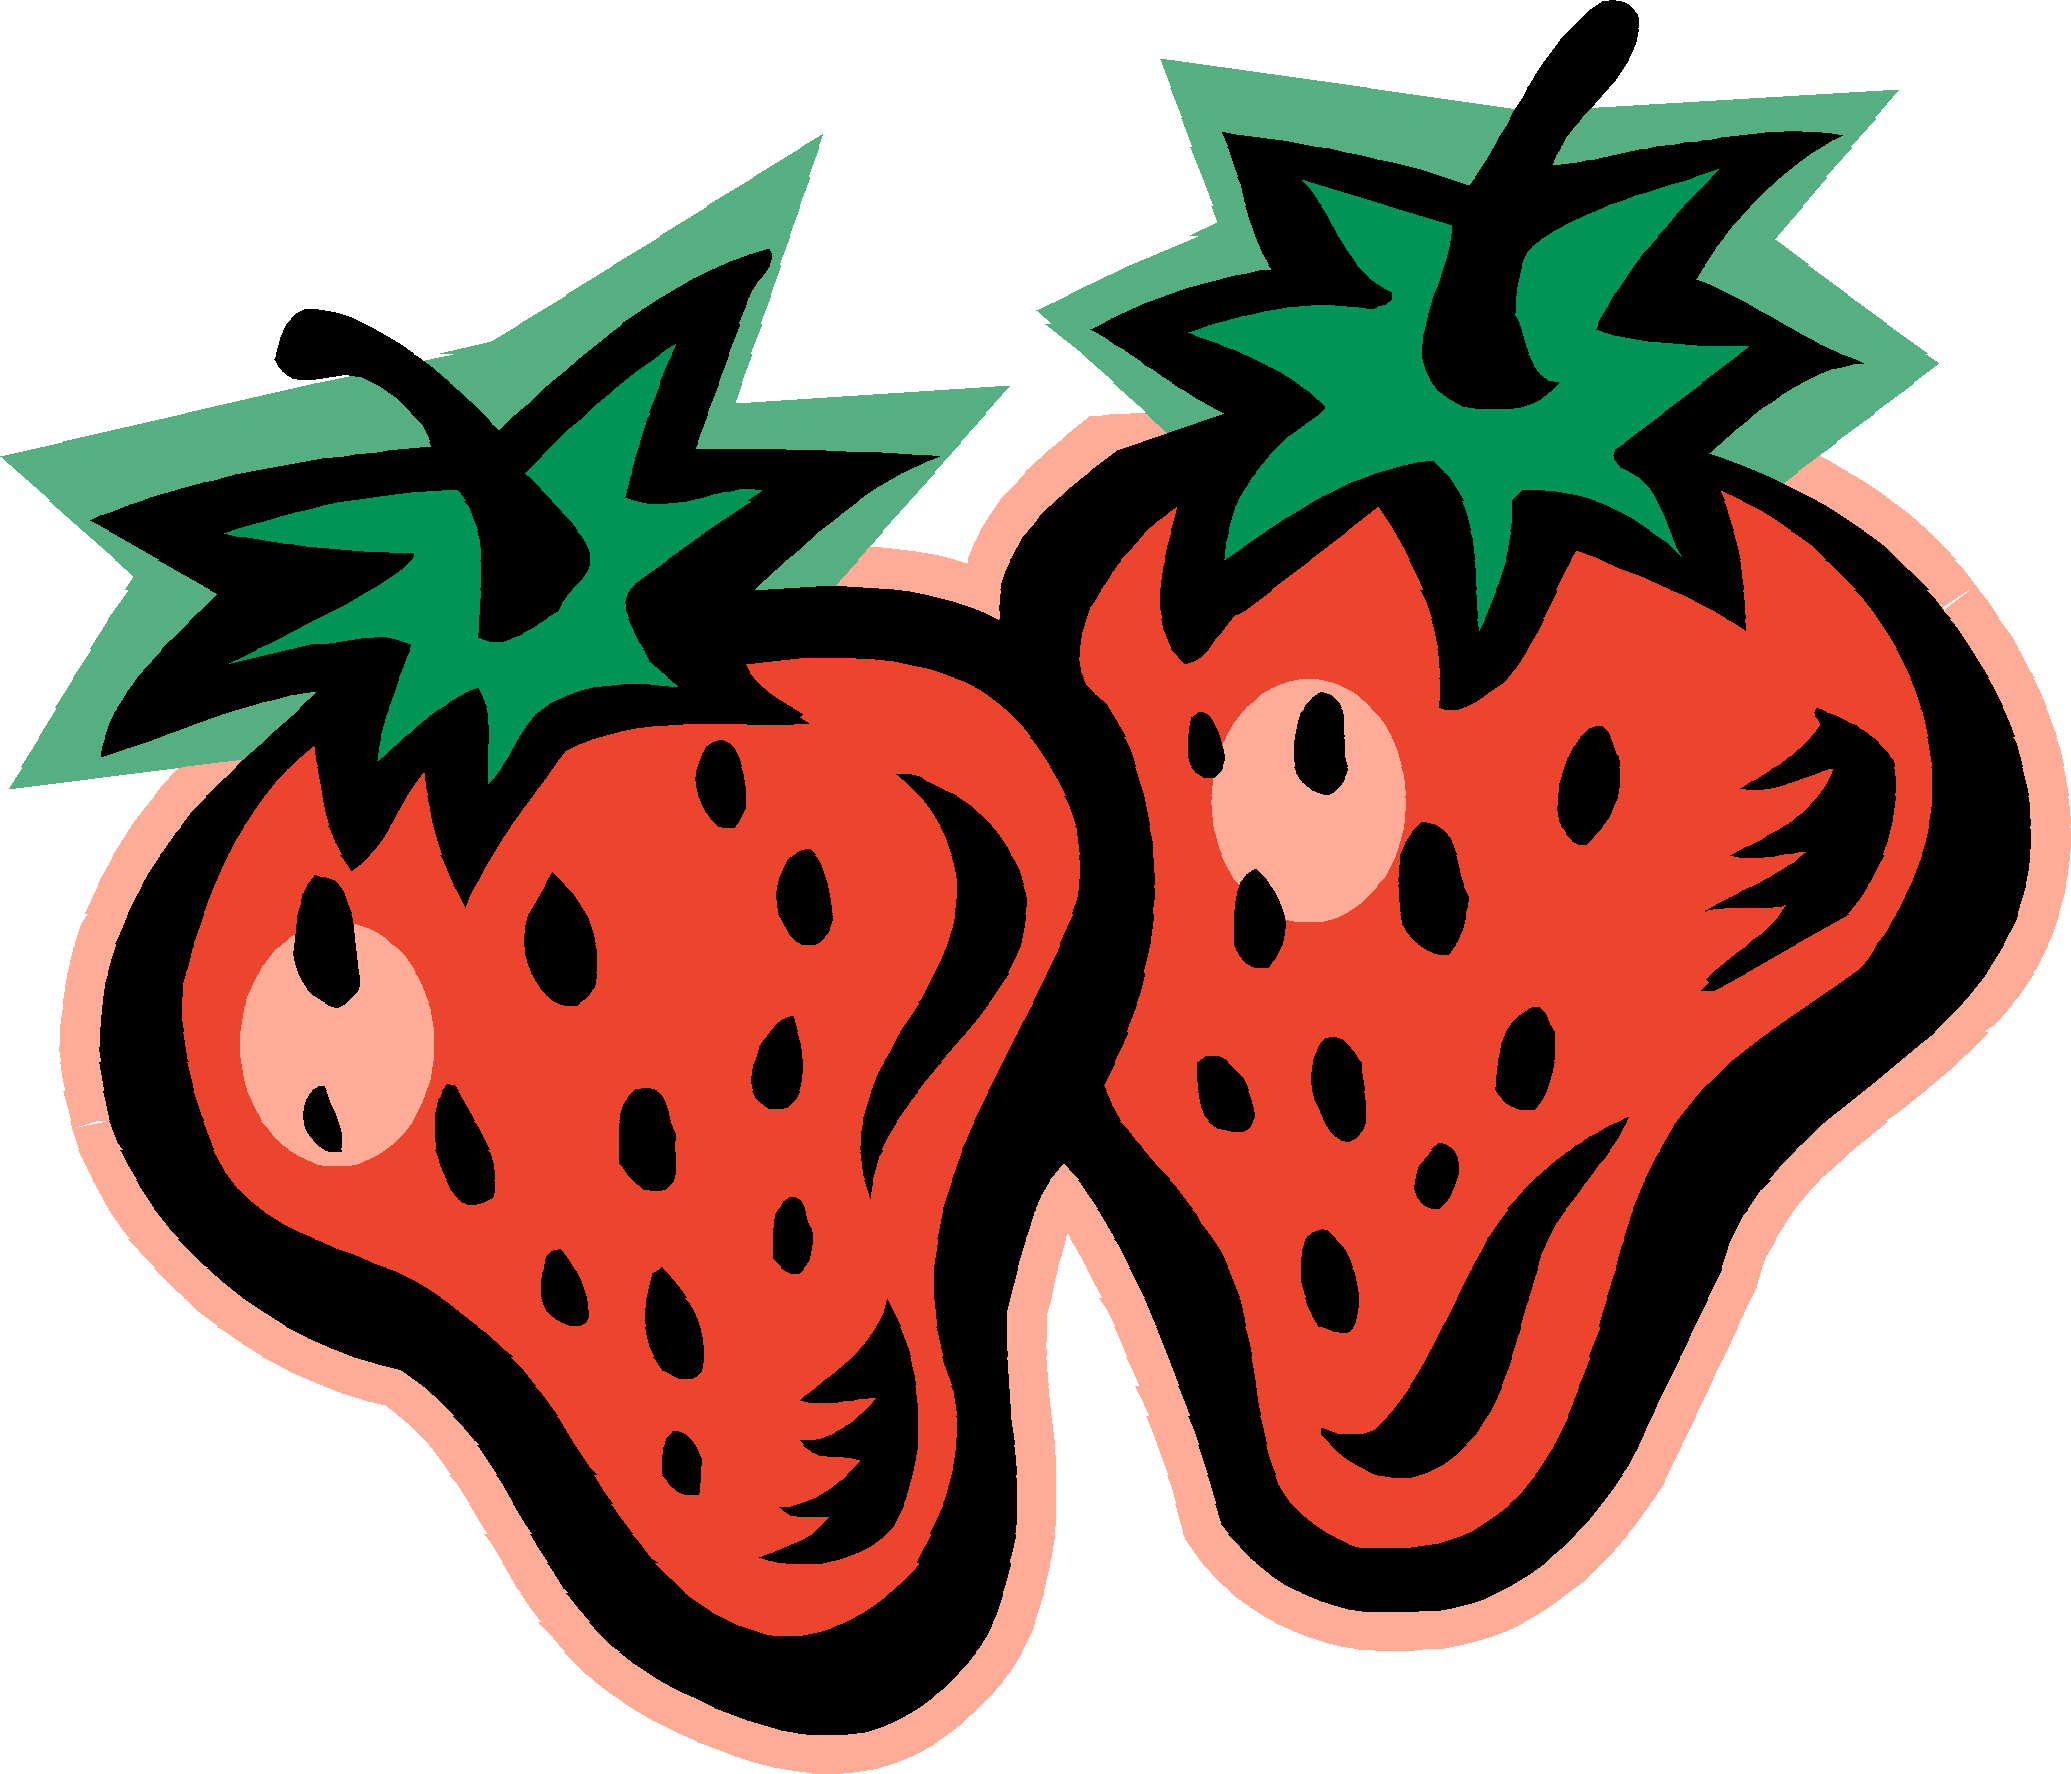 black and white free clipart 2 #cliparting com. #strawberry. #clipart. 